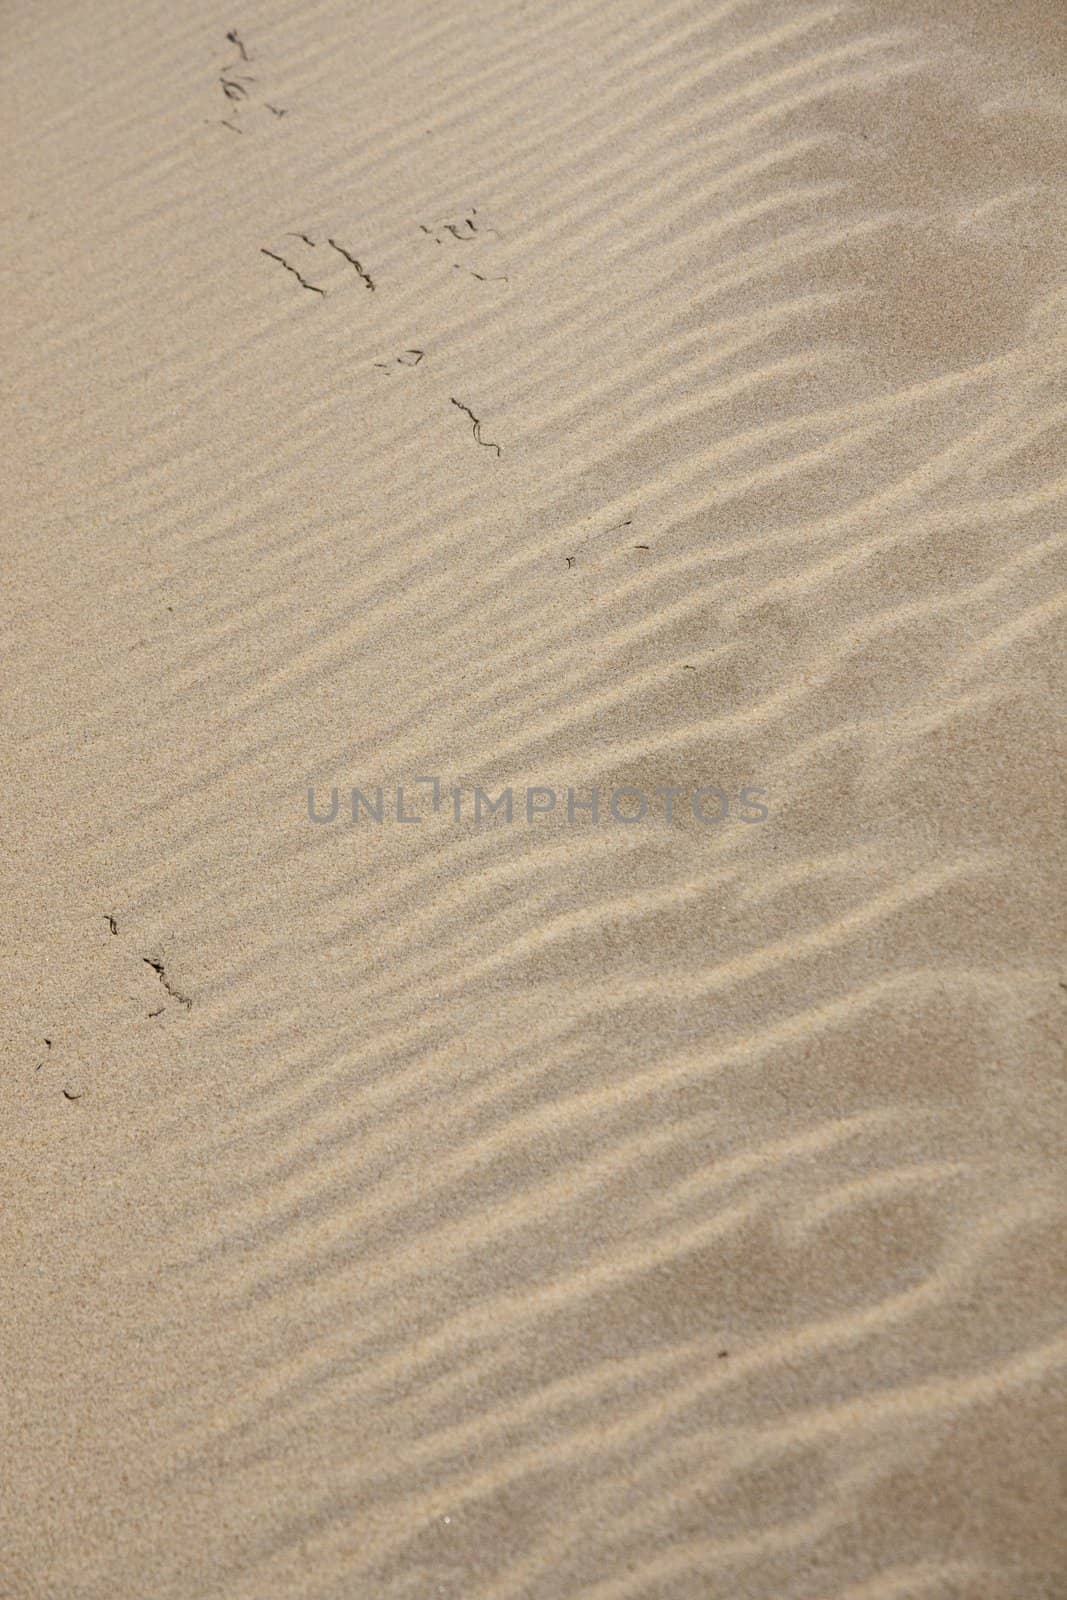 View of the beautiful lines on the sand on the beach .